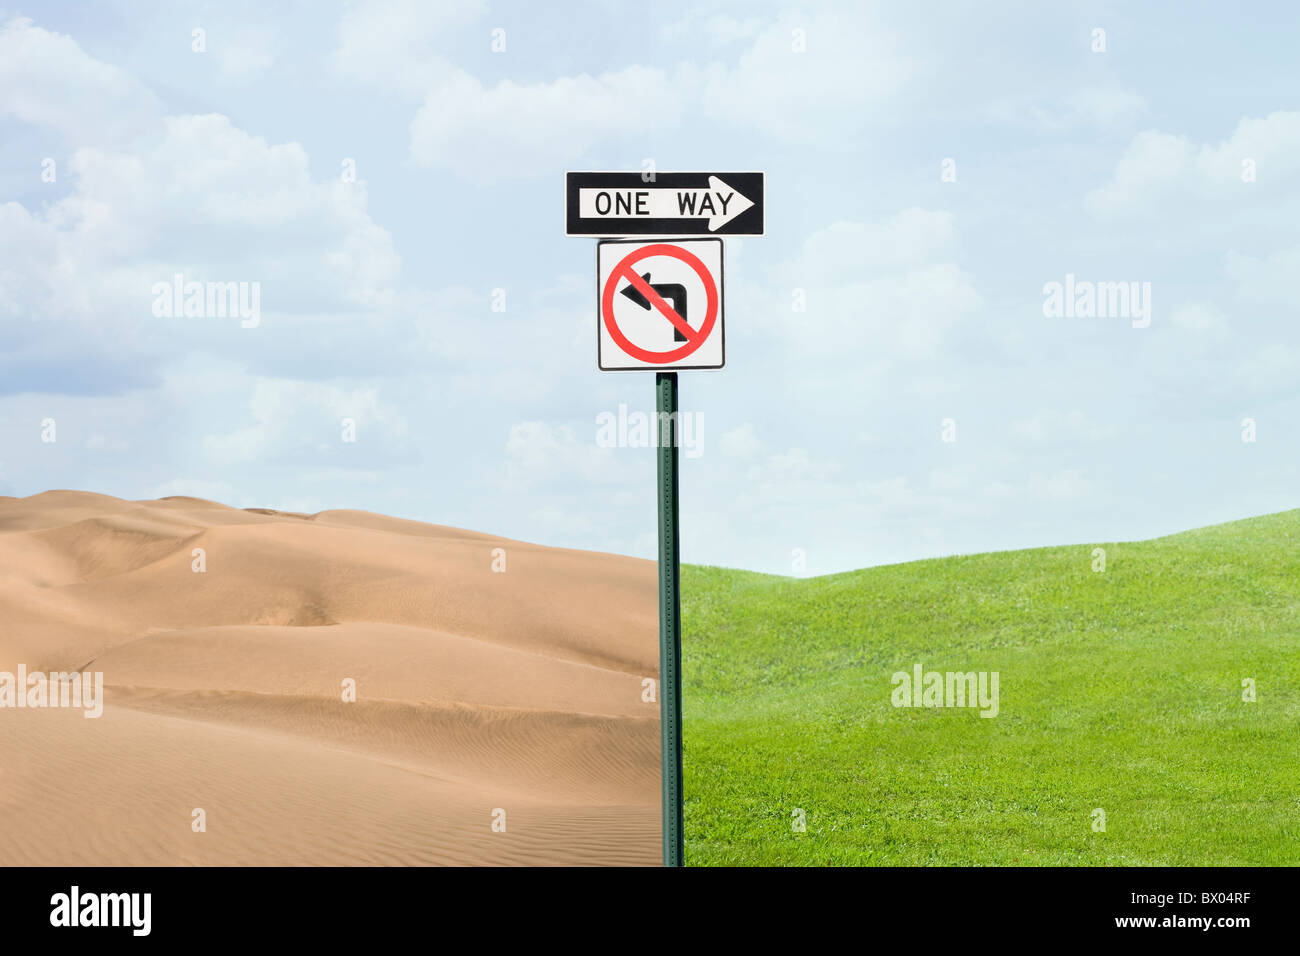 Road signs pointing at green grass and desert Stock Photo